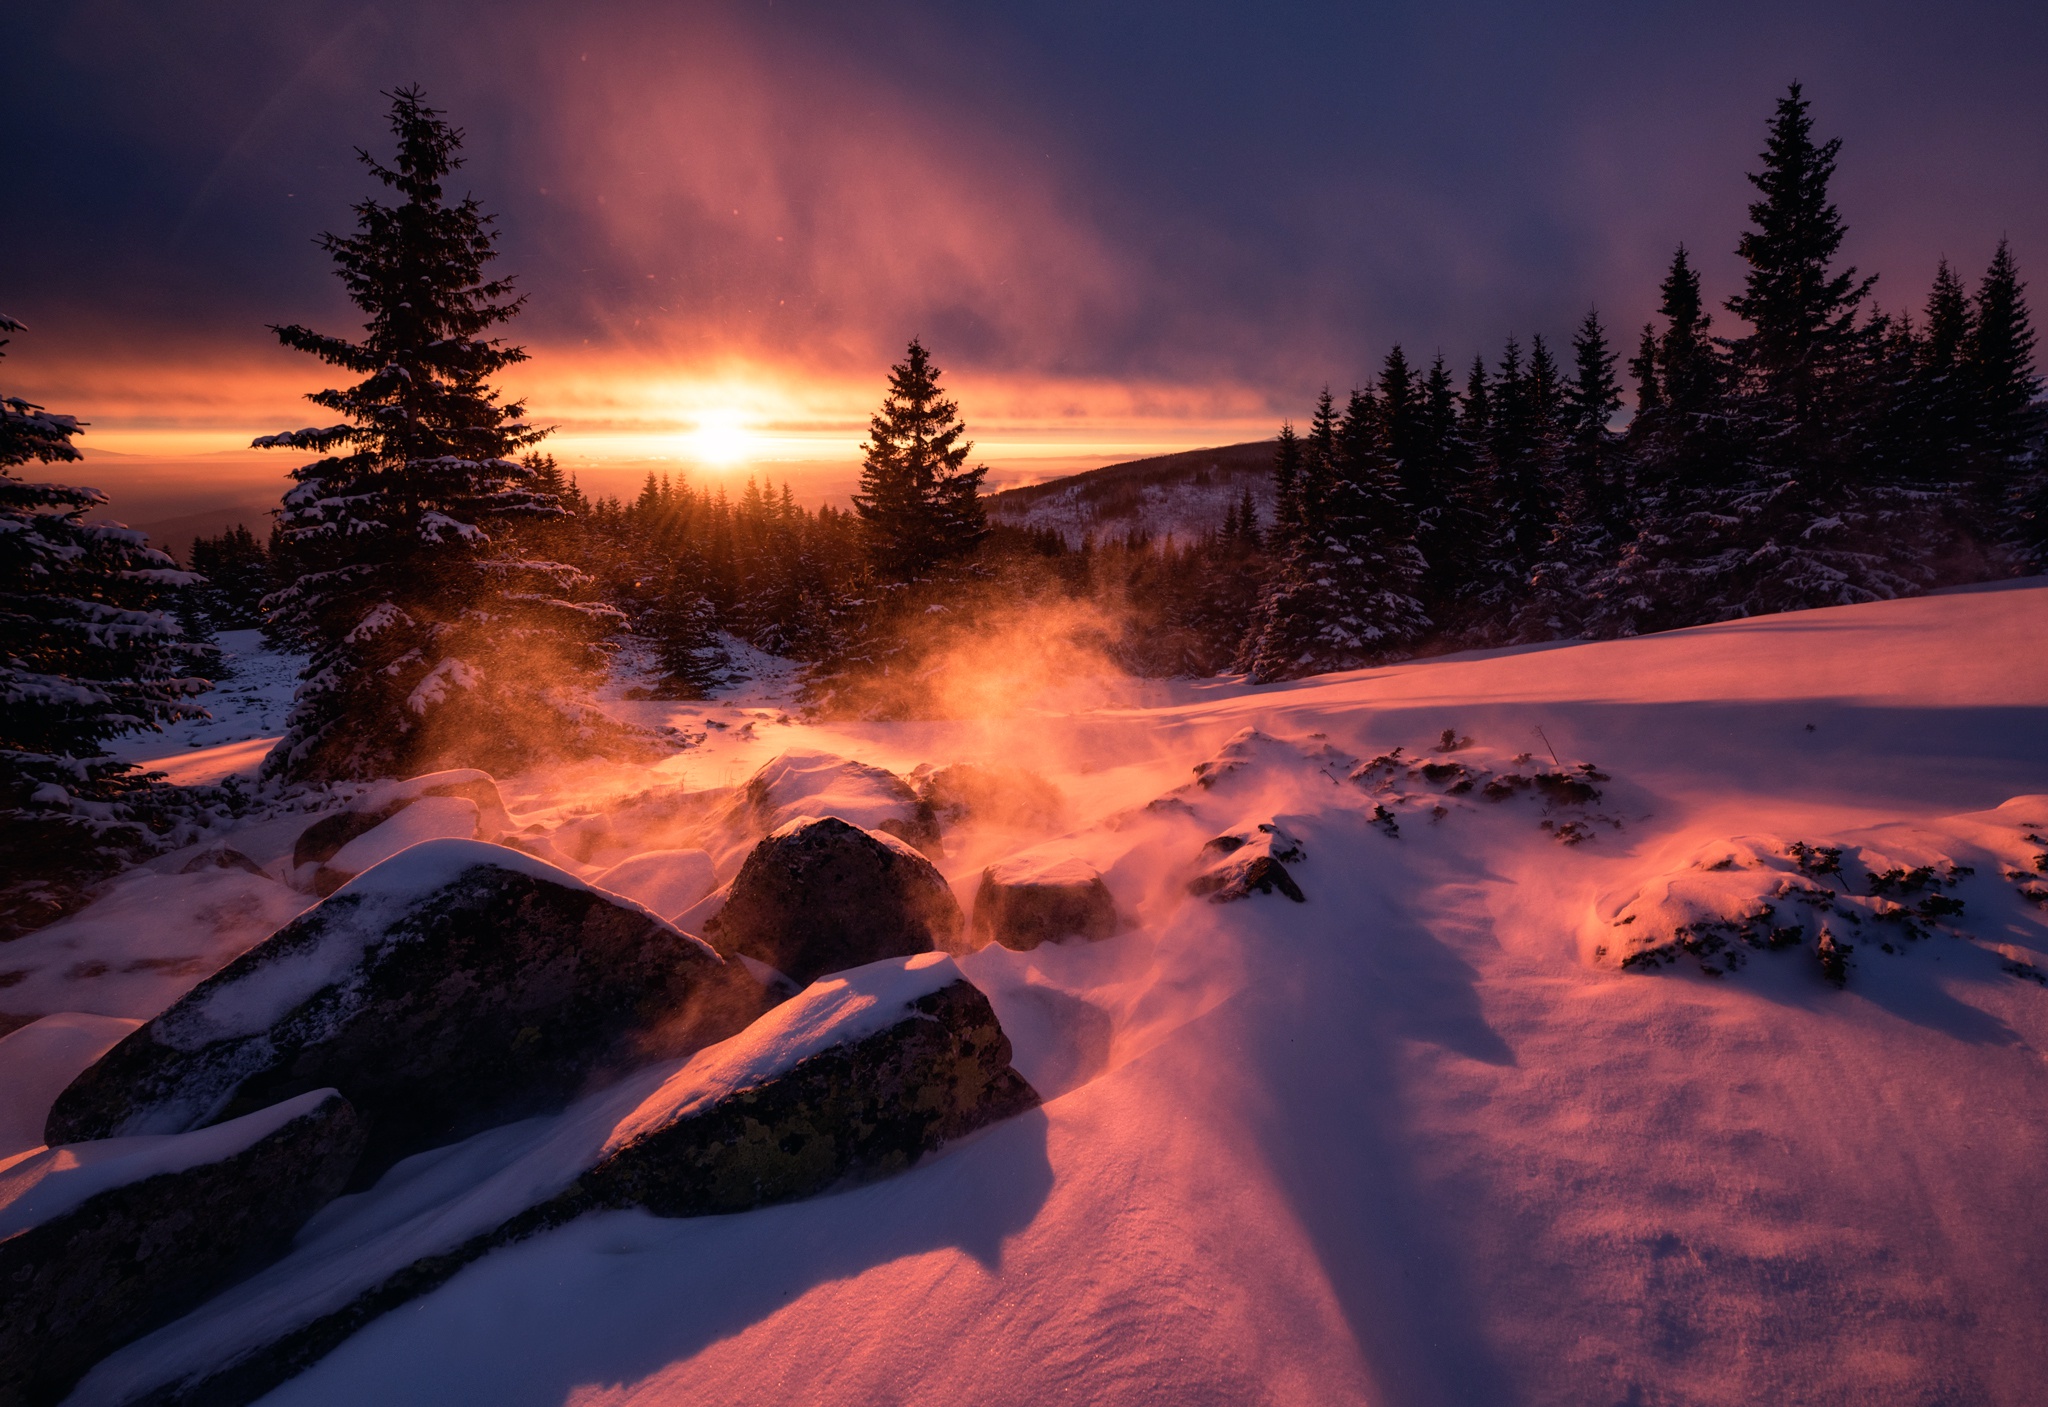 winter sunset wallpapers wallpaper cave on snow sunset wallpapers